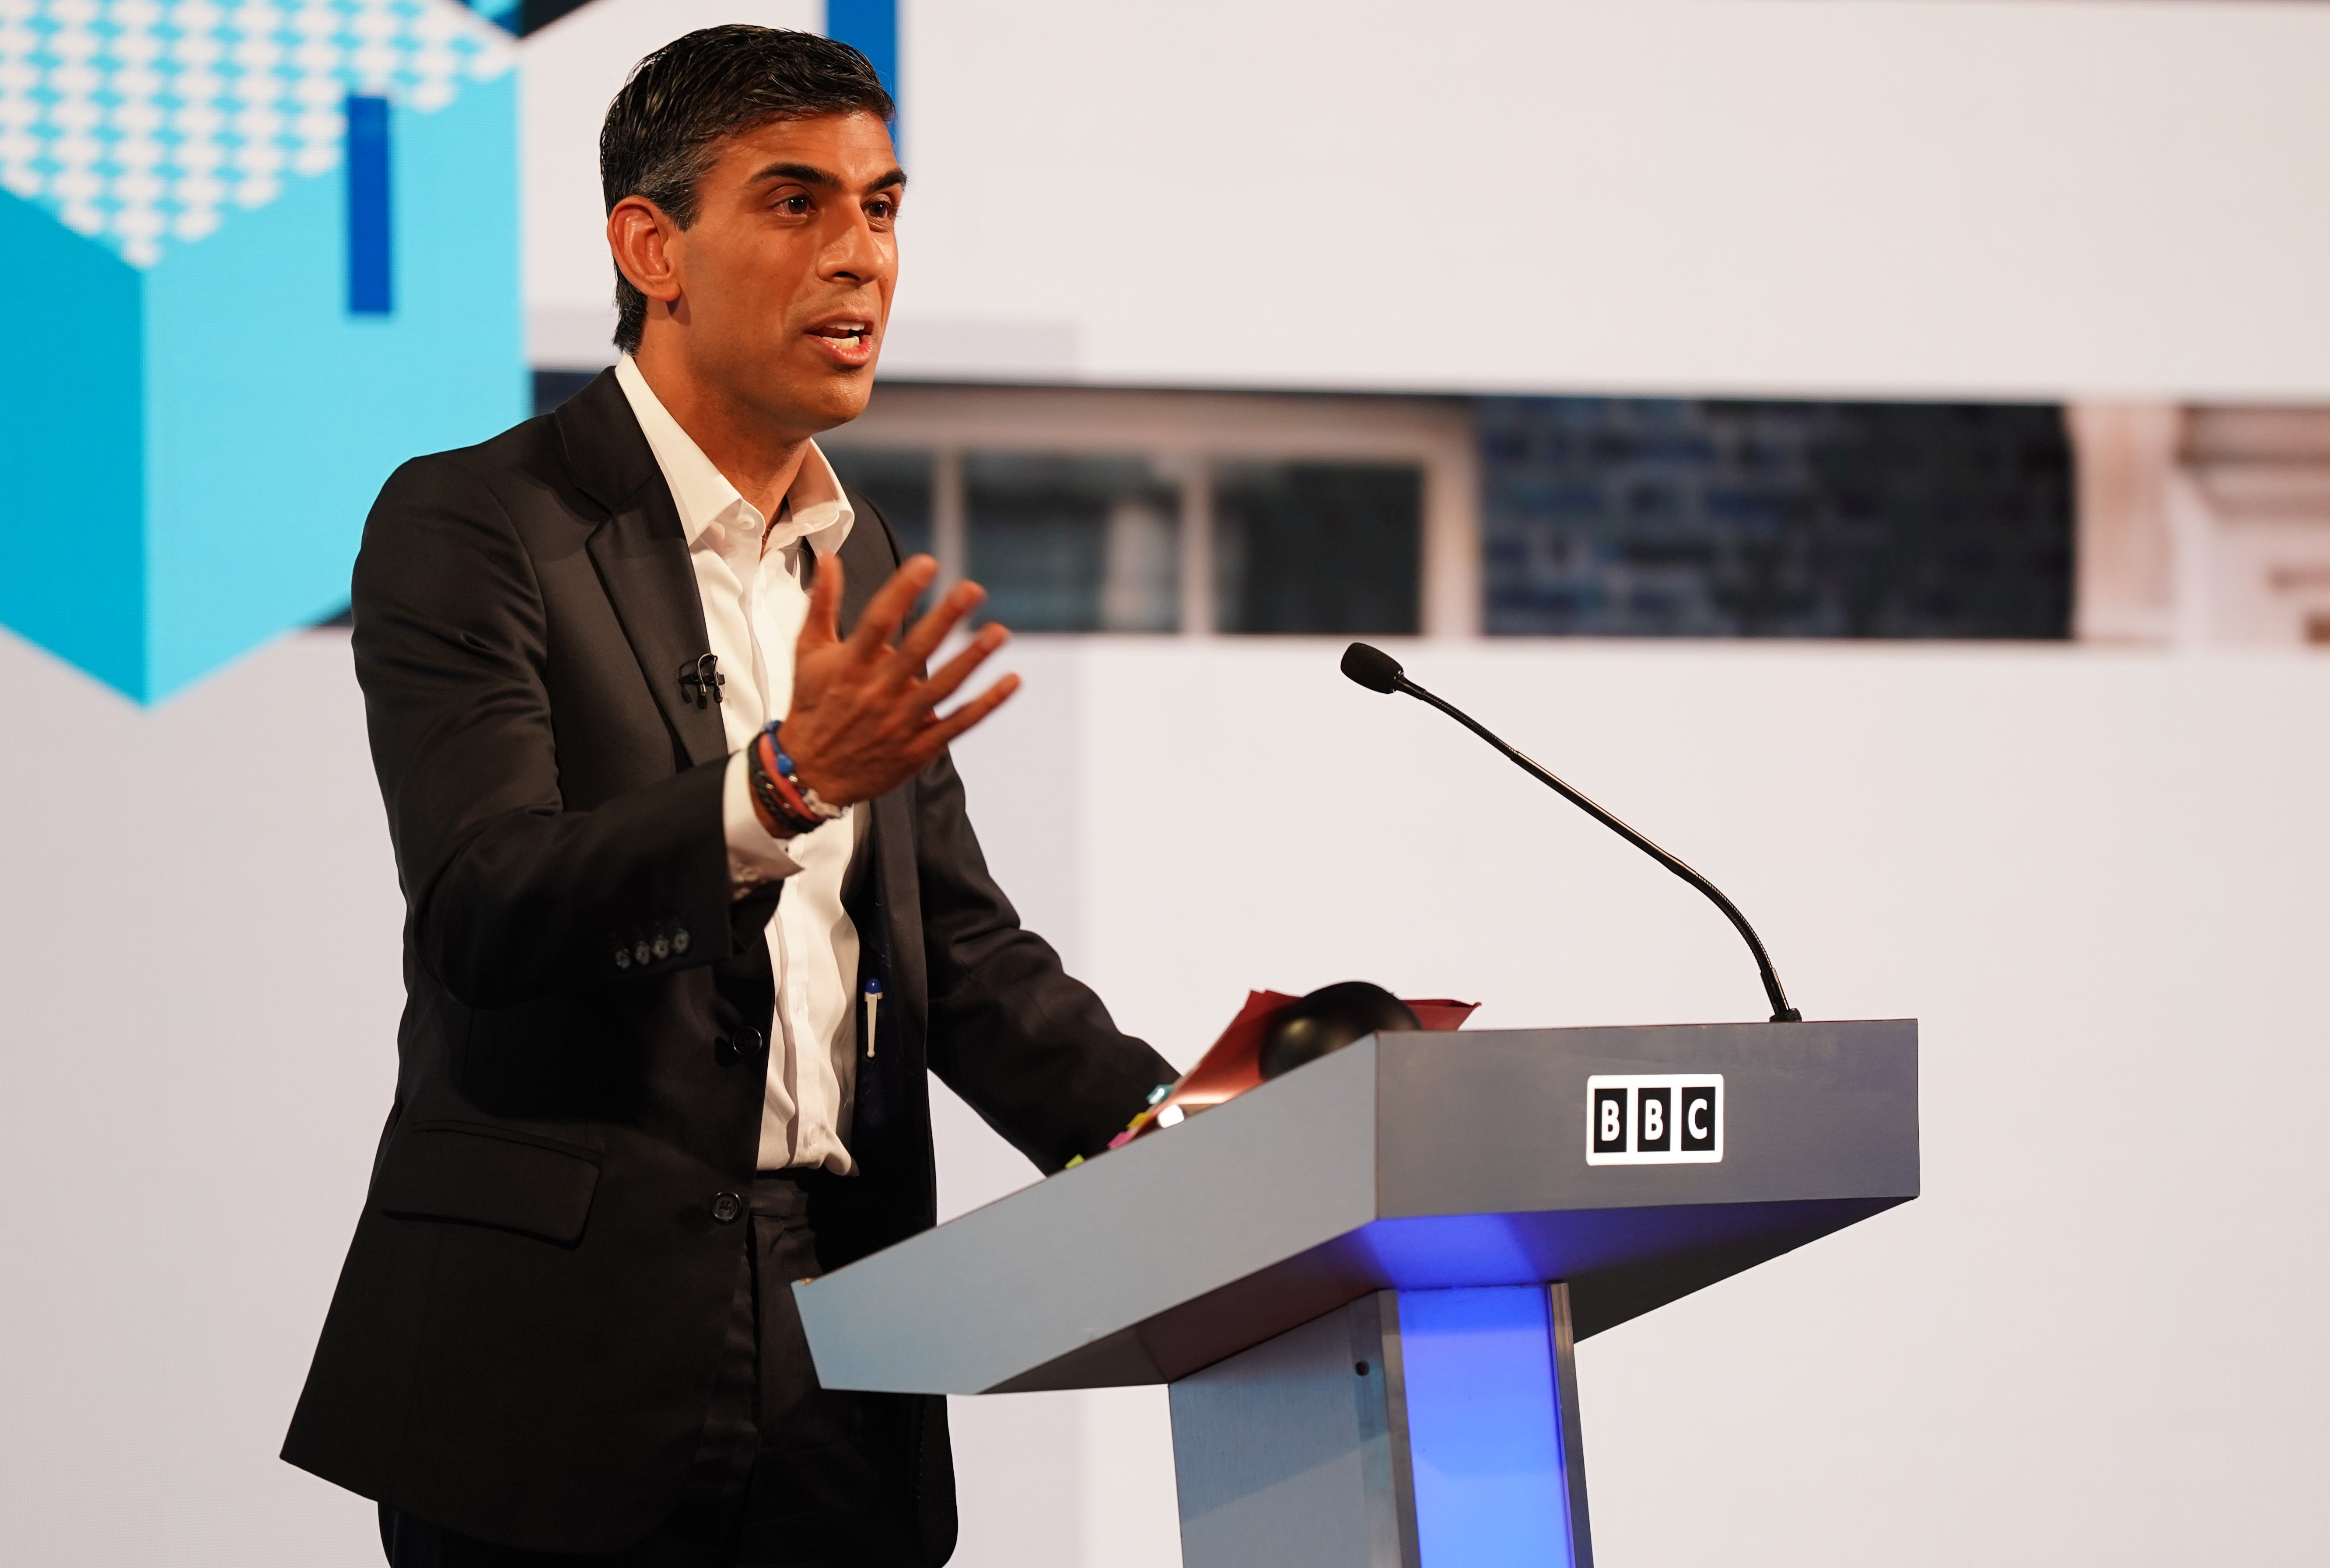 Under Rishi Sunak, the Treasury had favoured tax breaks for business over help for individuals and families, says Tax Justice UK